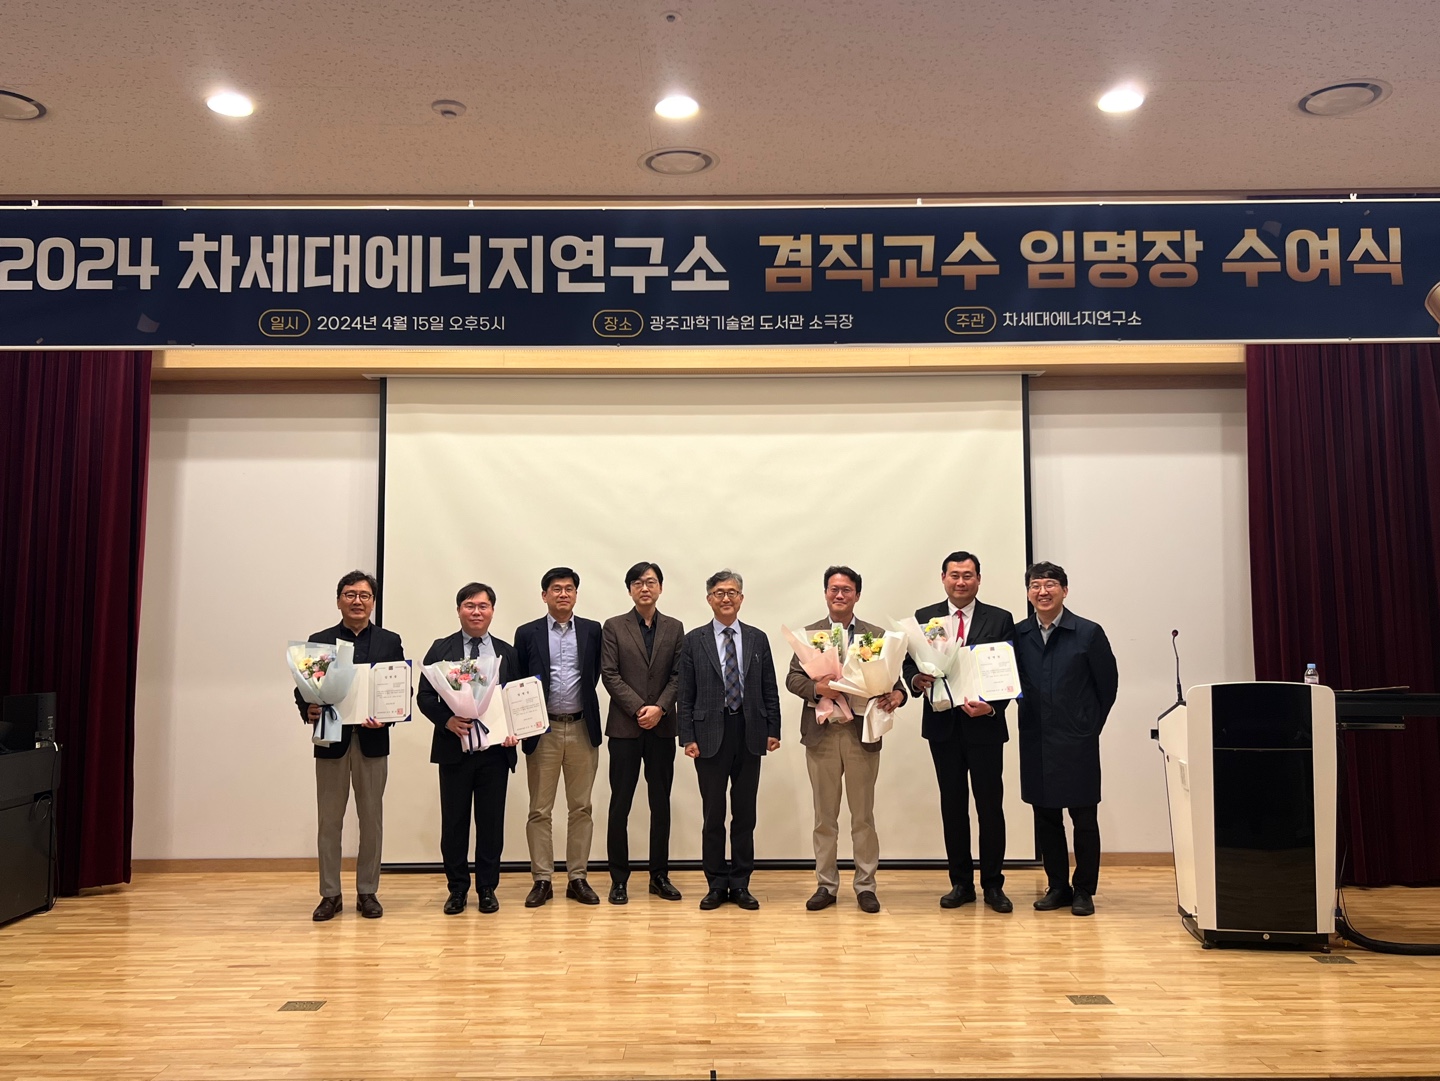 GIST appoints four energy experts as adjunct professors at the Research Institute for Solar and Sustainable Energies 이미지